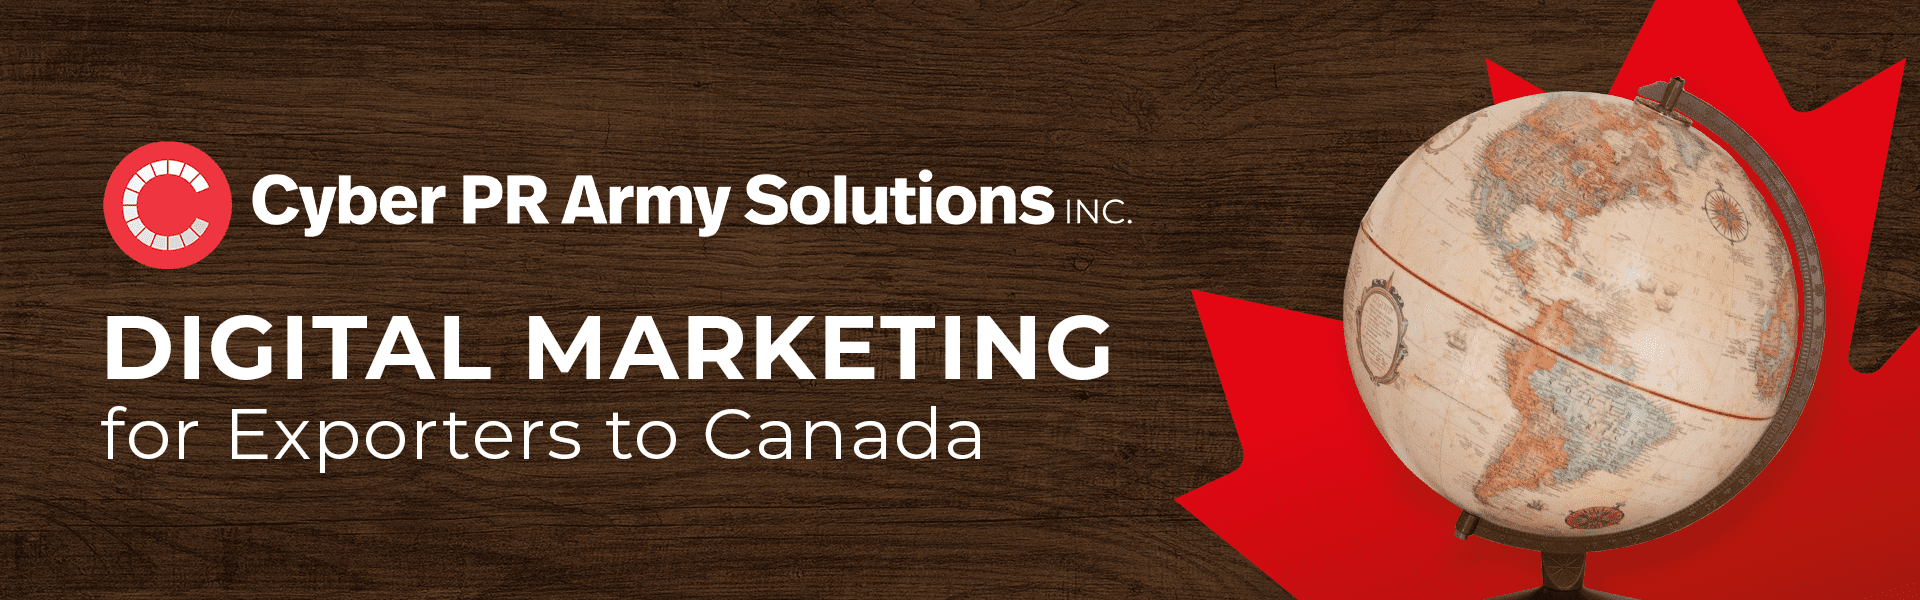 Header graphic - Digital marketing for exporters to Canada